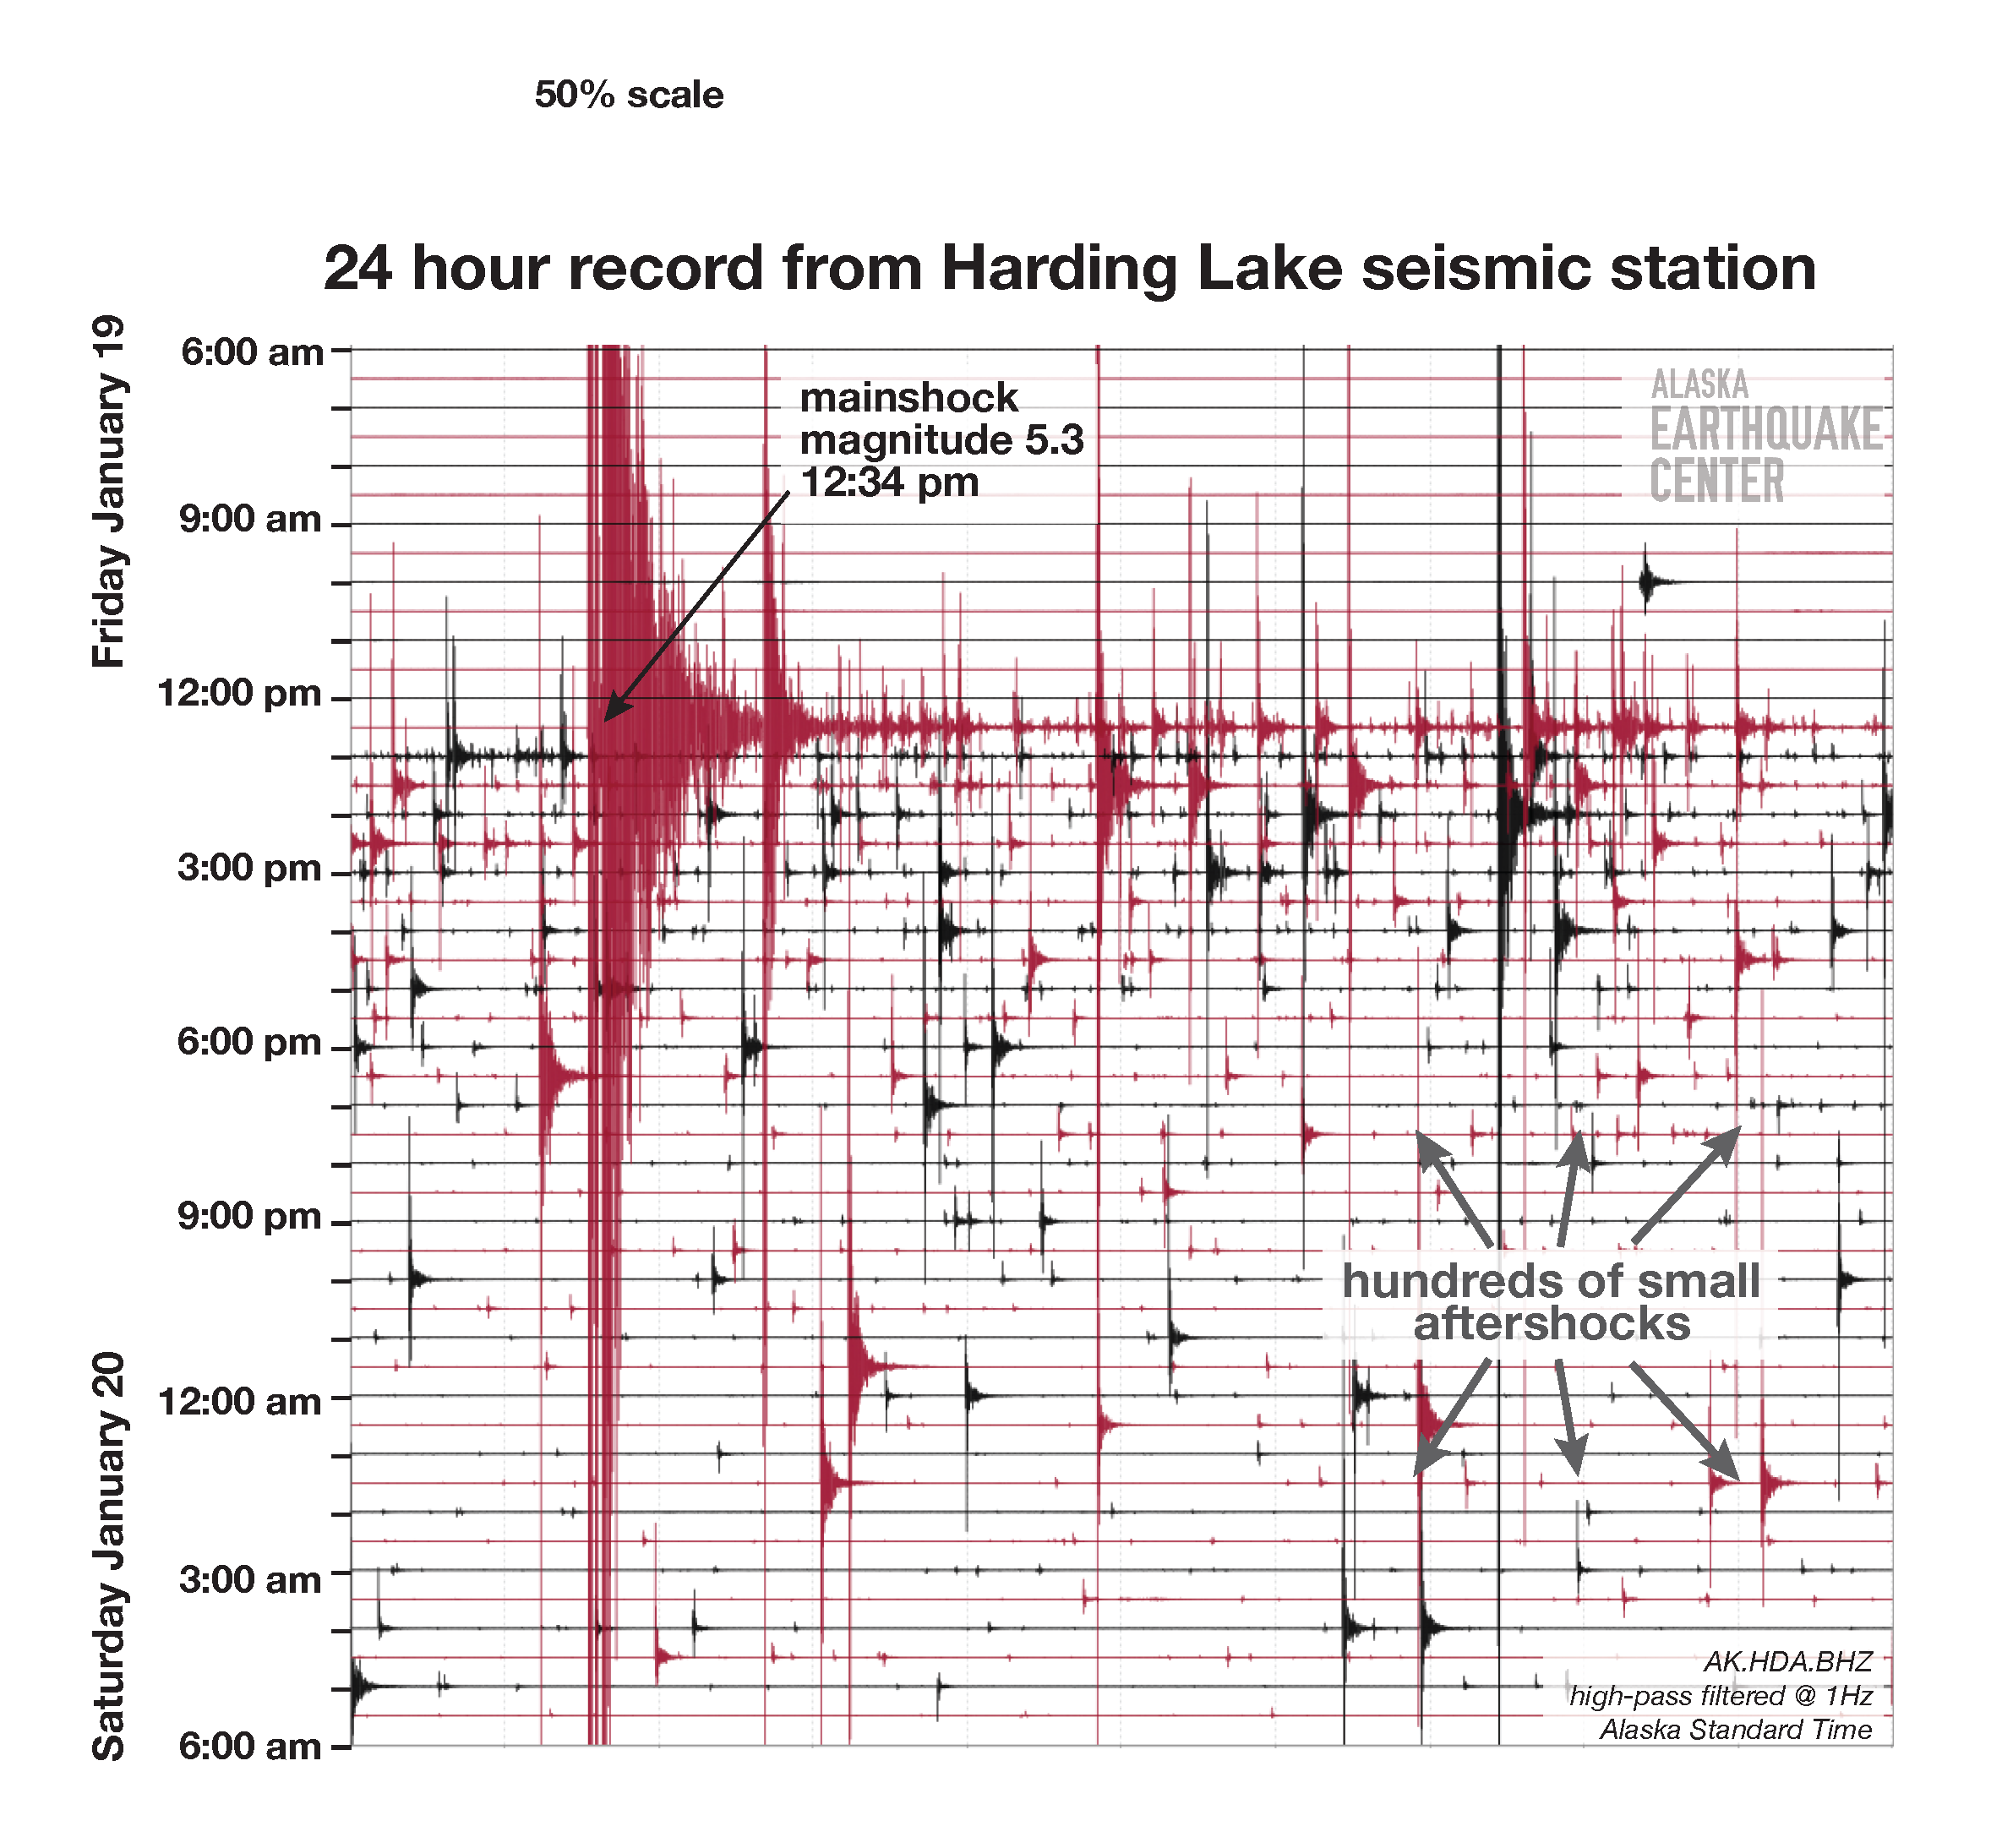 Seismic record from the Harding Lake station shows the mainshock and almost continuous aftershocks.